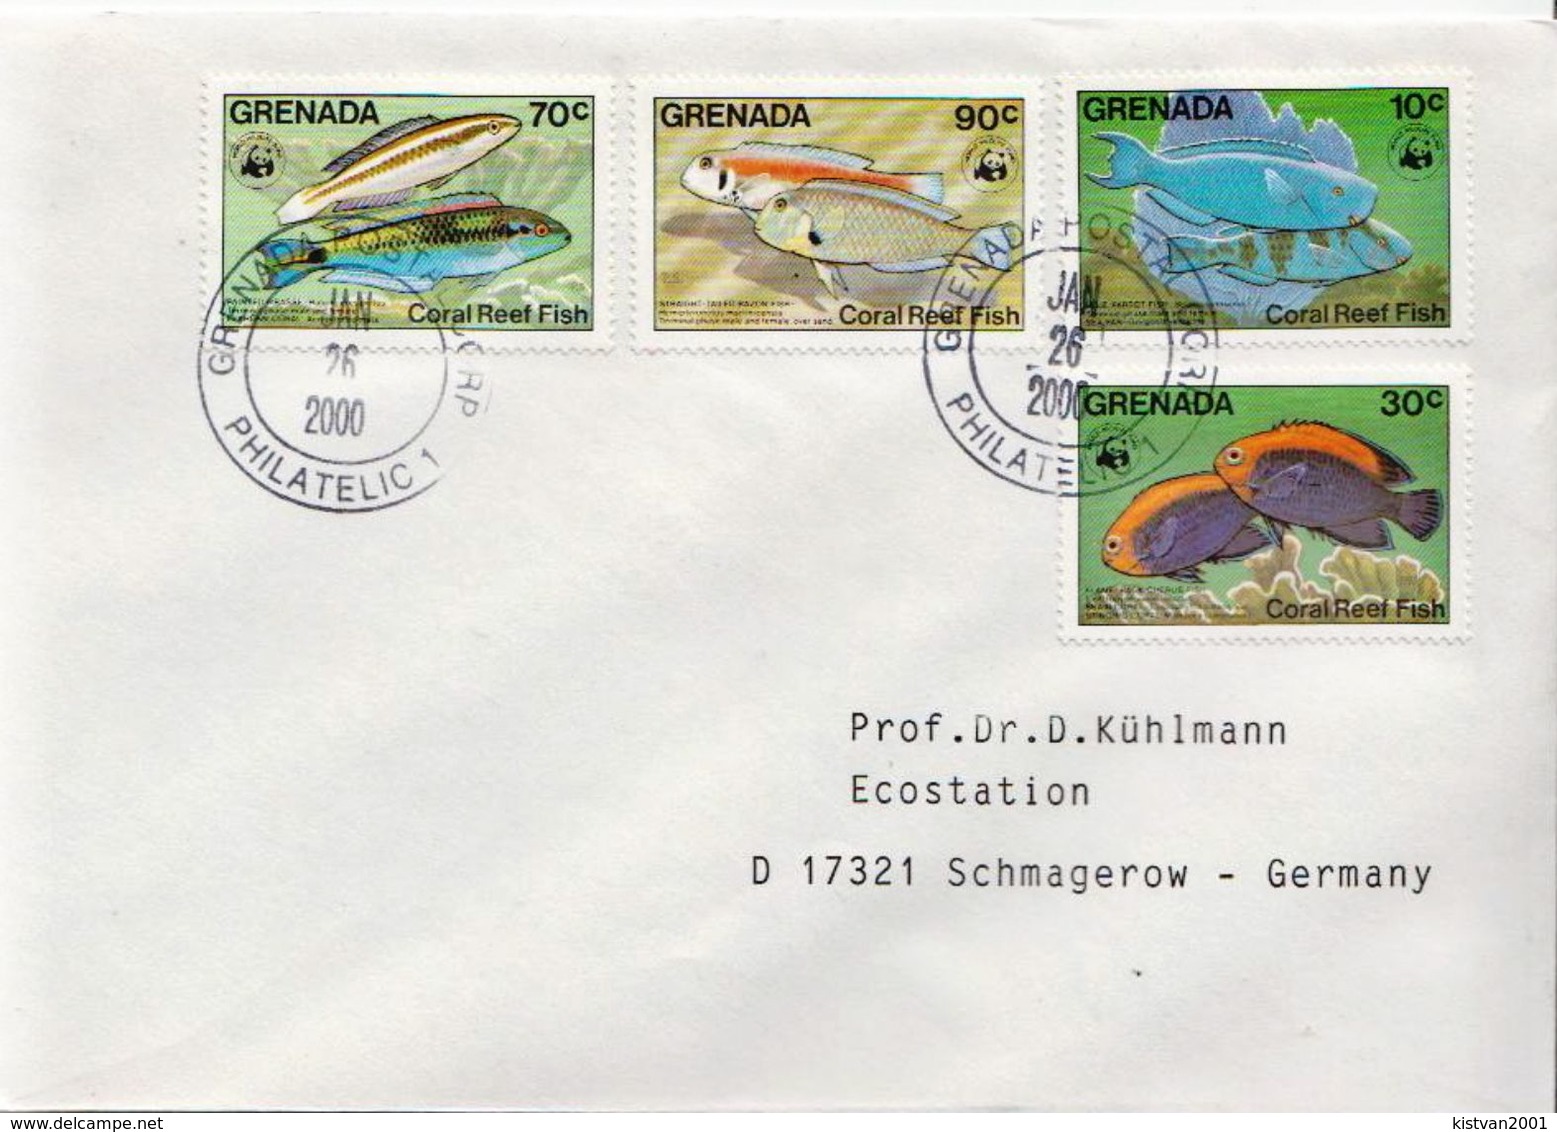 Postal History Cover: Grenada Fishes, WWF Set On Cover - Covers & Documents